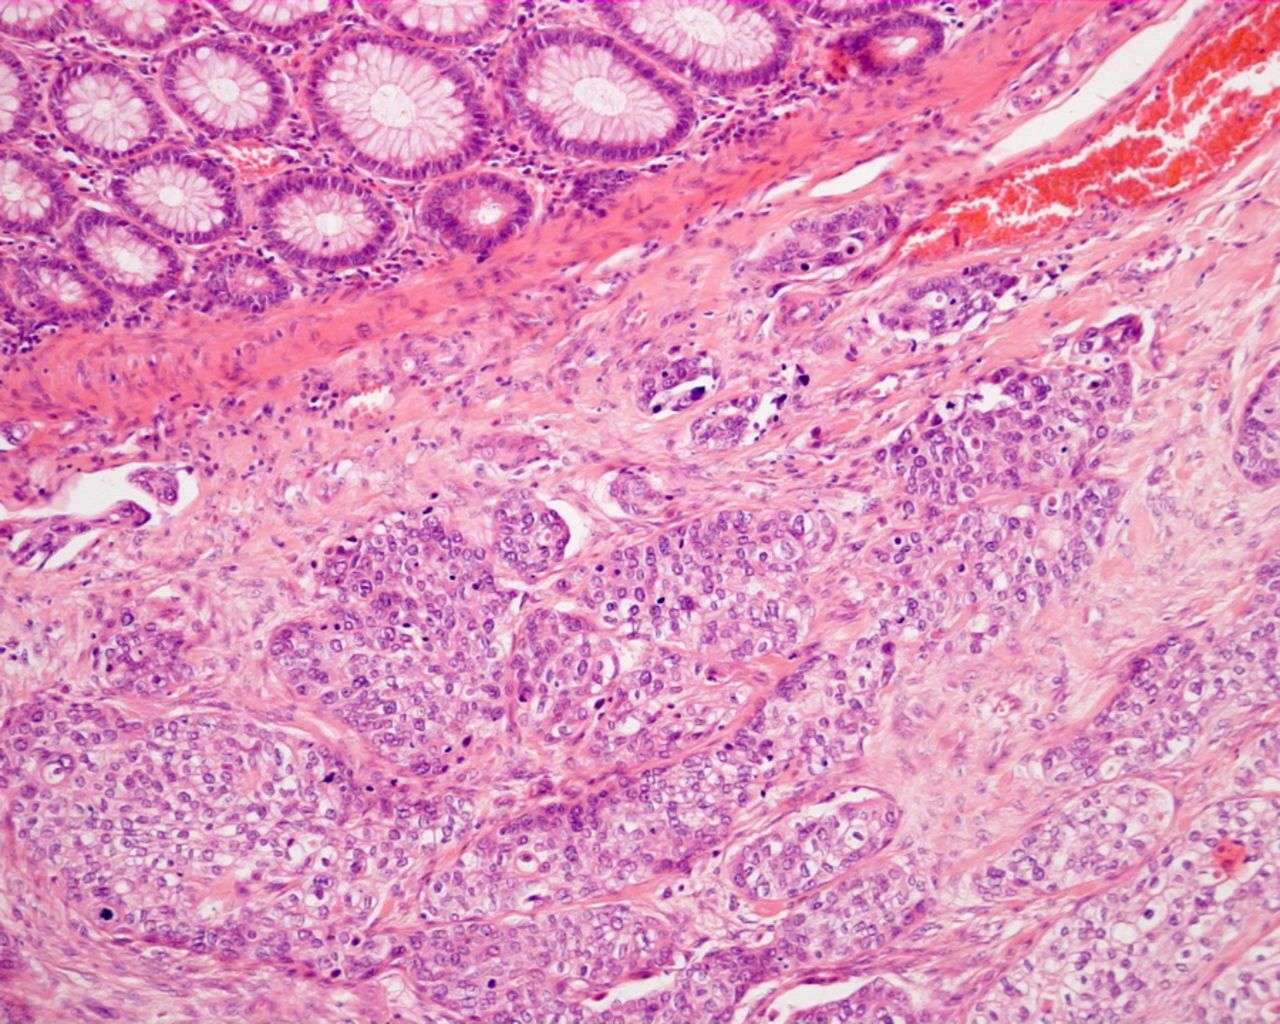 Squamous cell carcinoma arising in a mature cystic ...